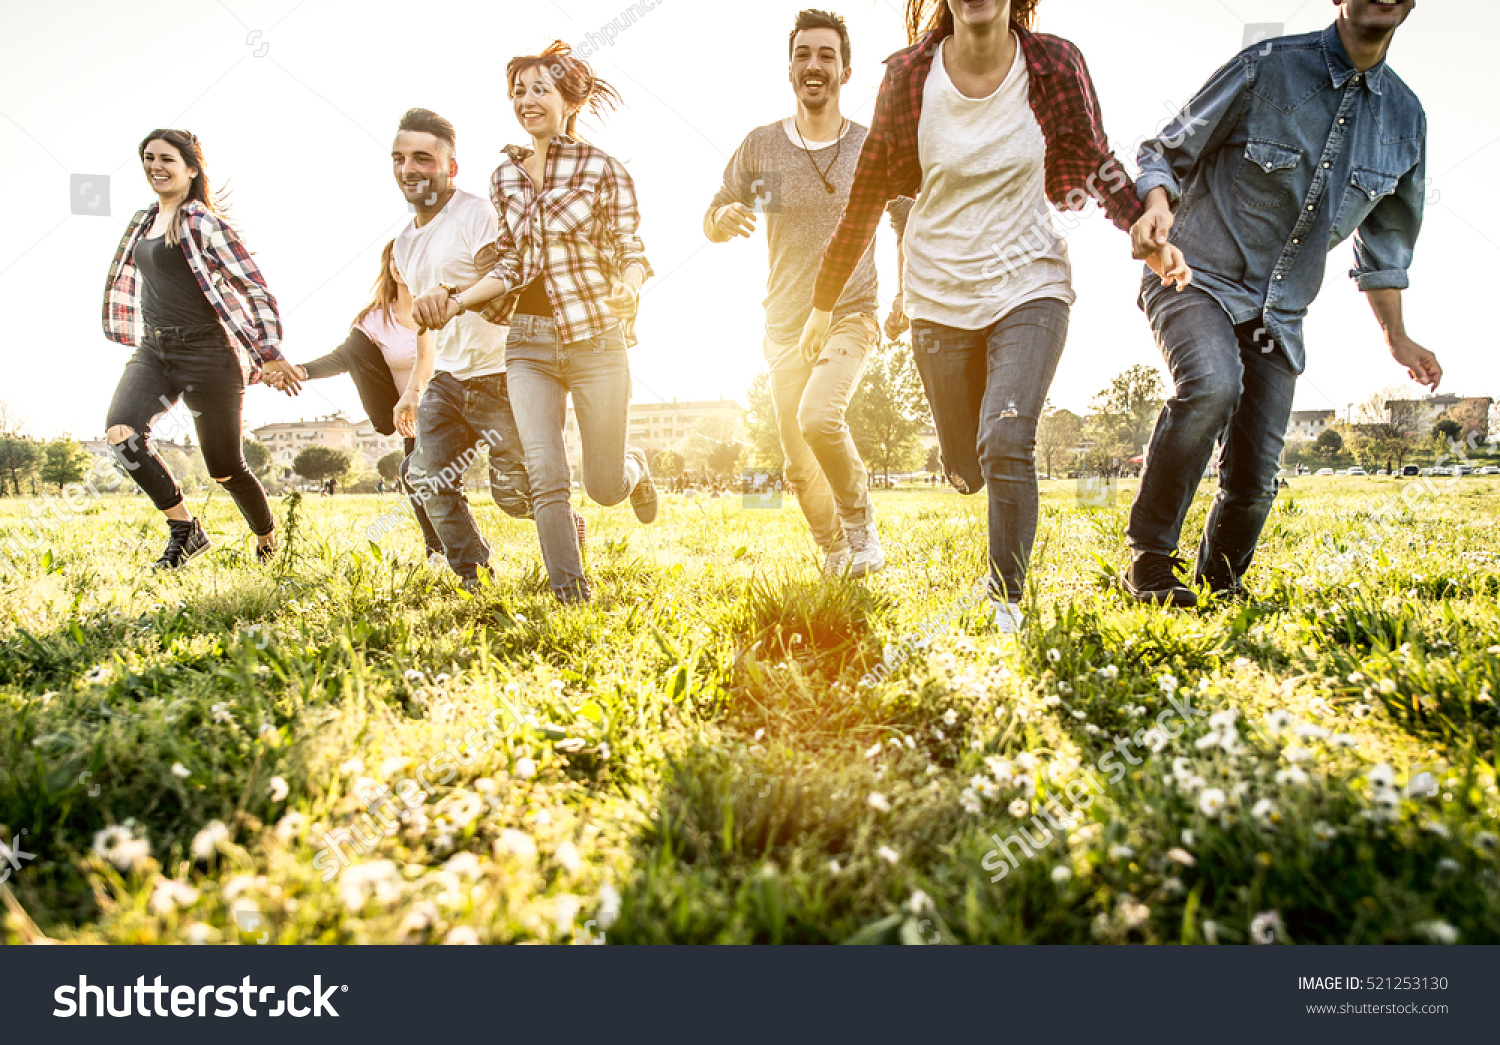 Group of friends running happily together in the grass #521253130